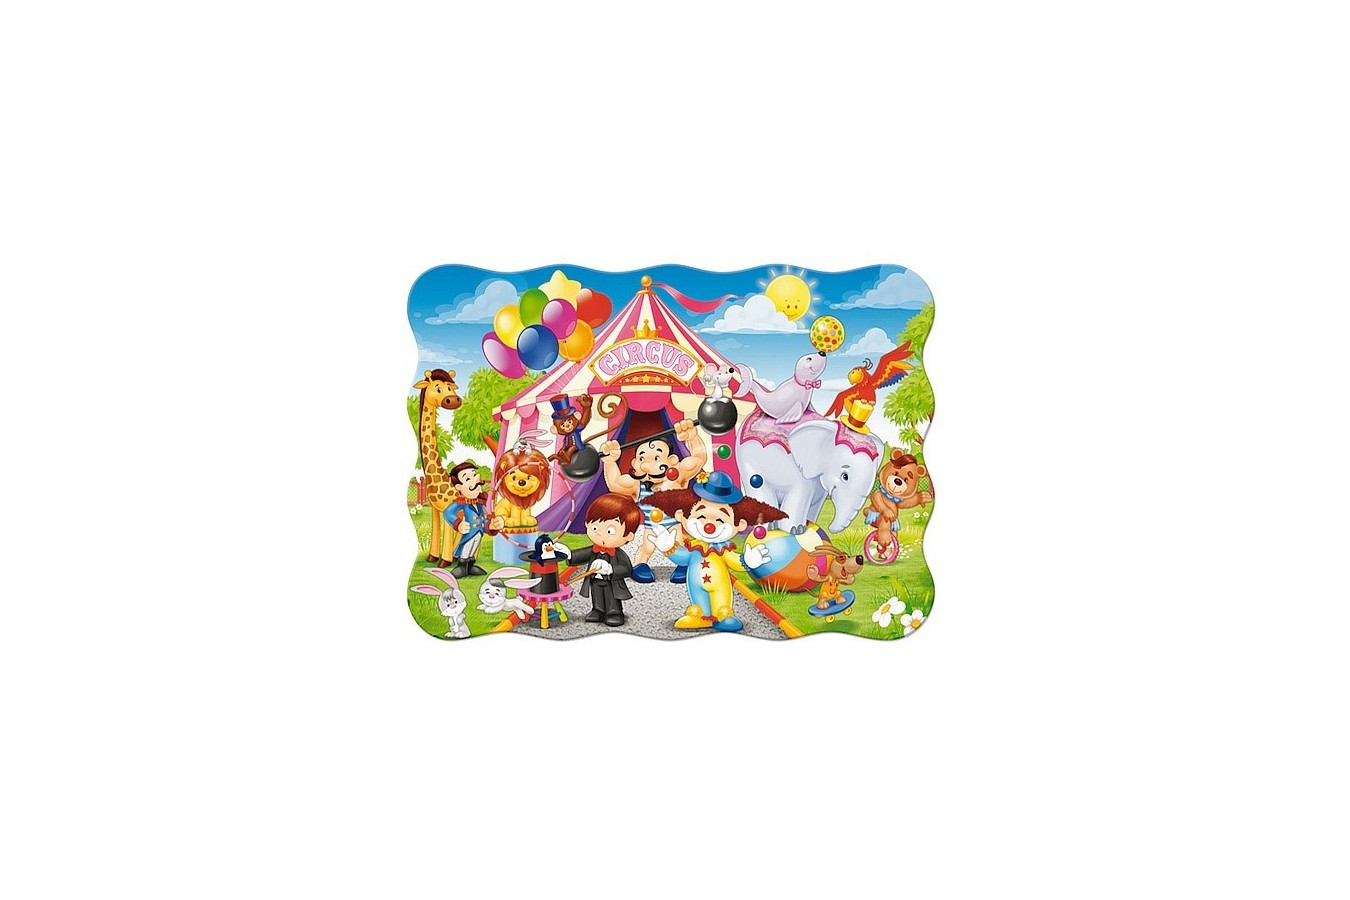 Puzzle Castorland - The Circus, 30 Piese